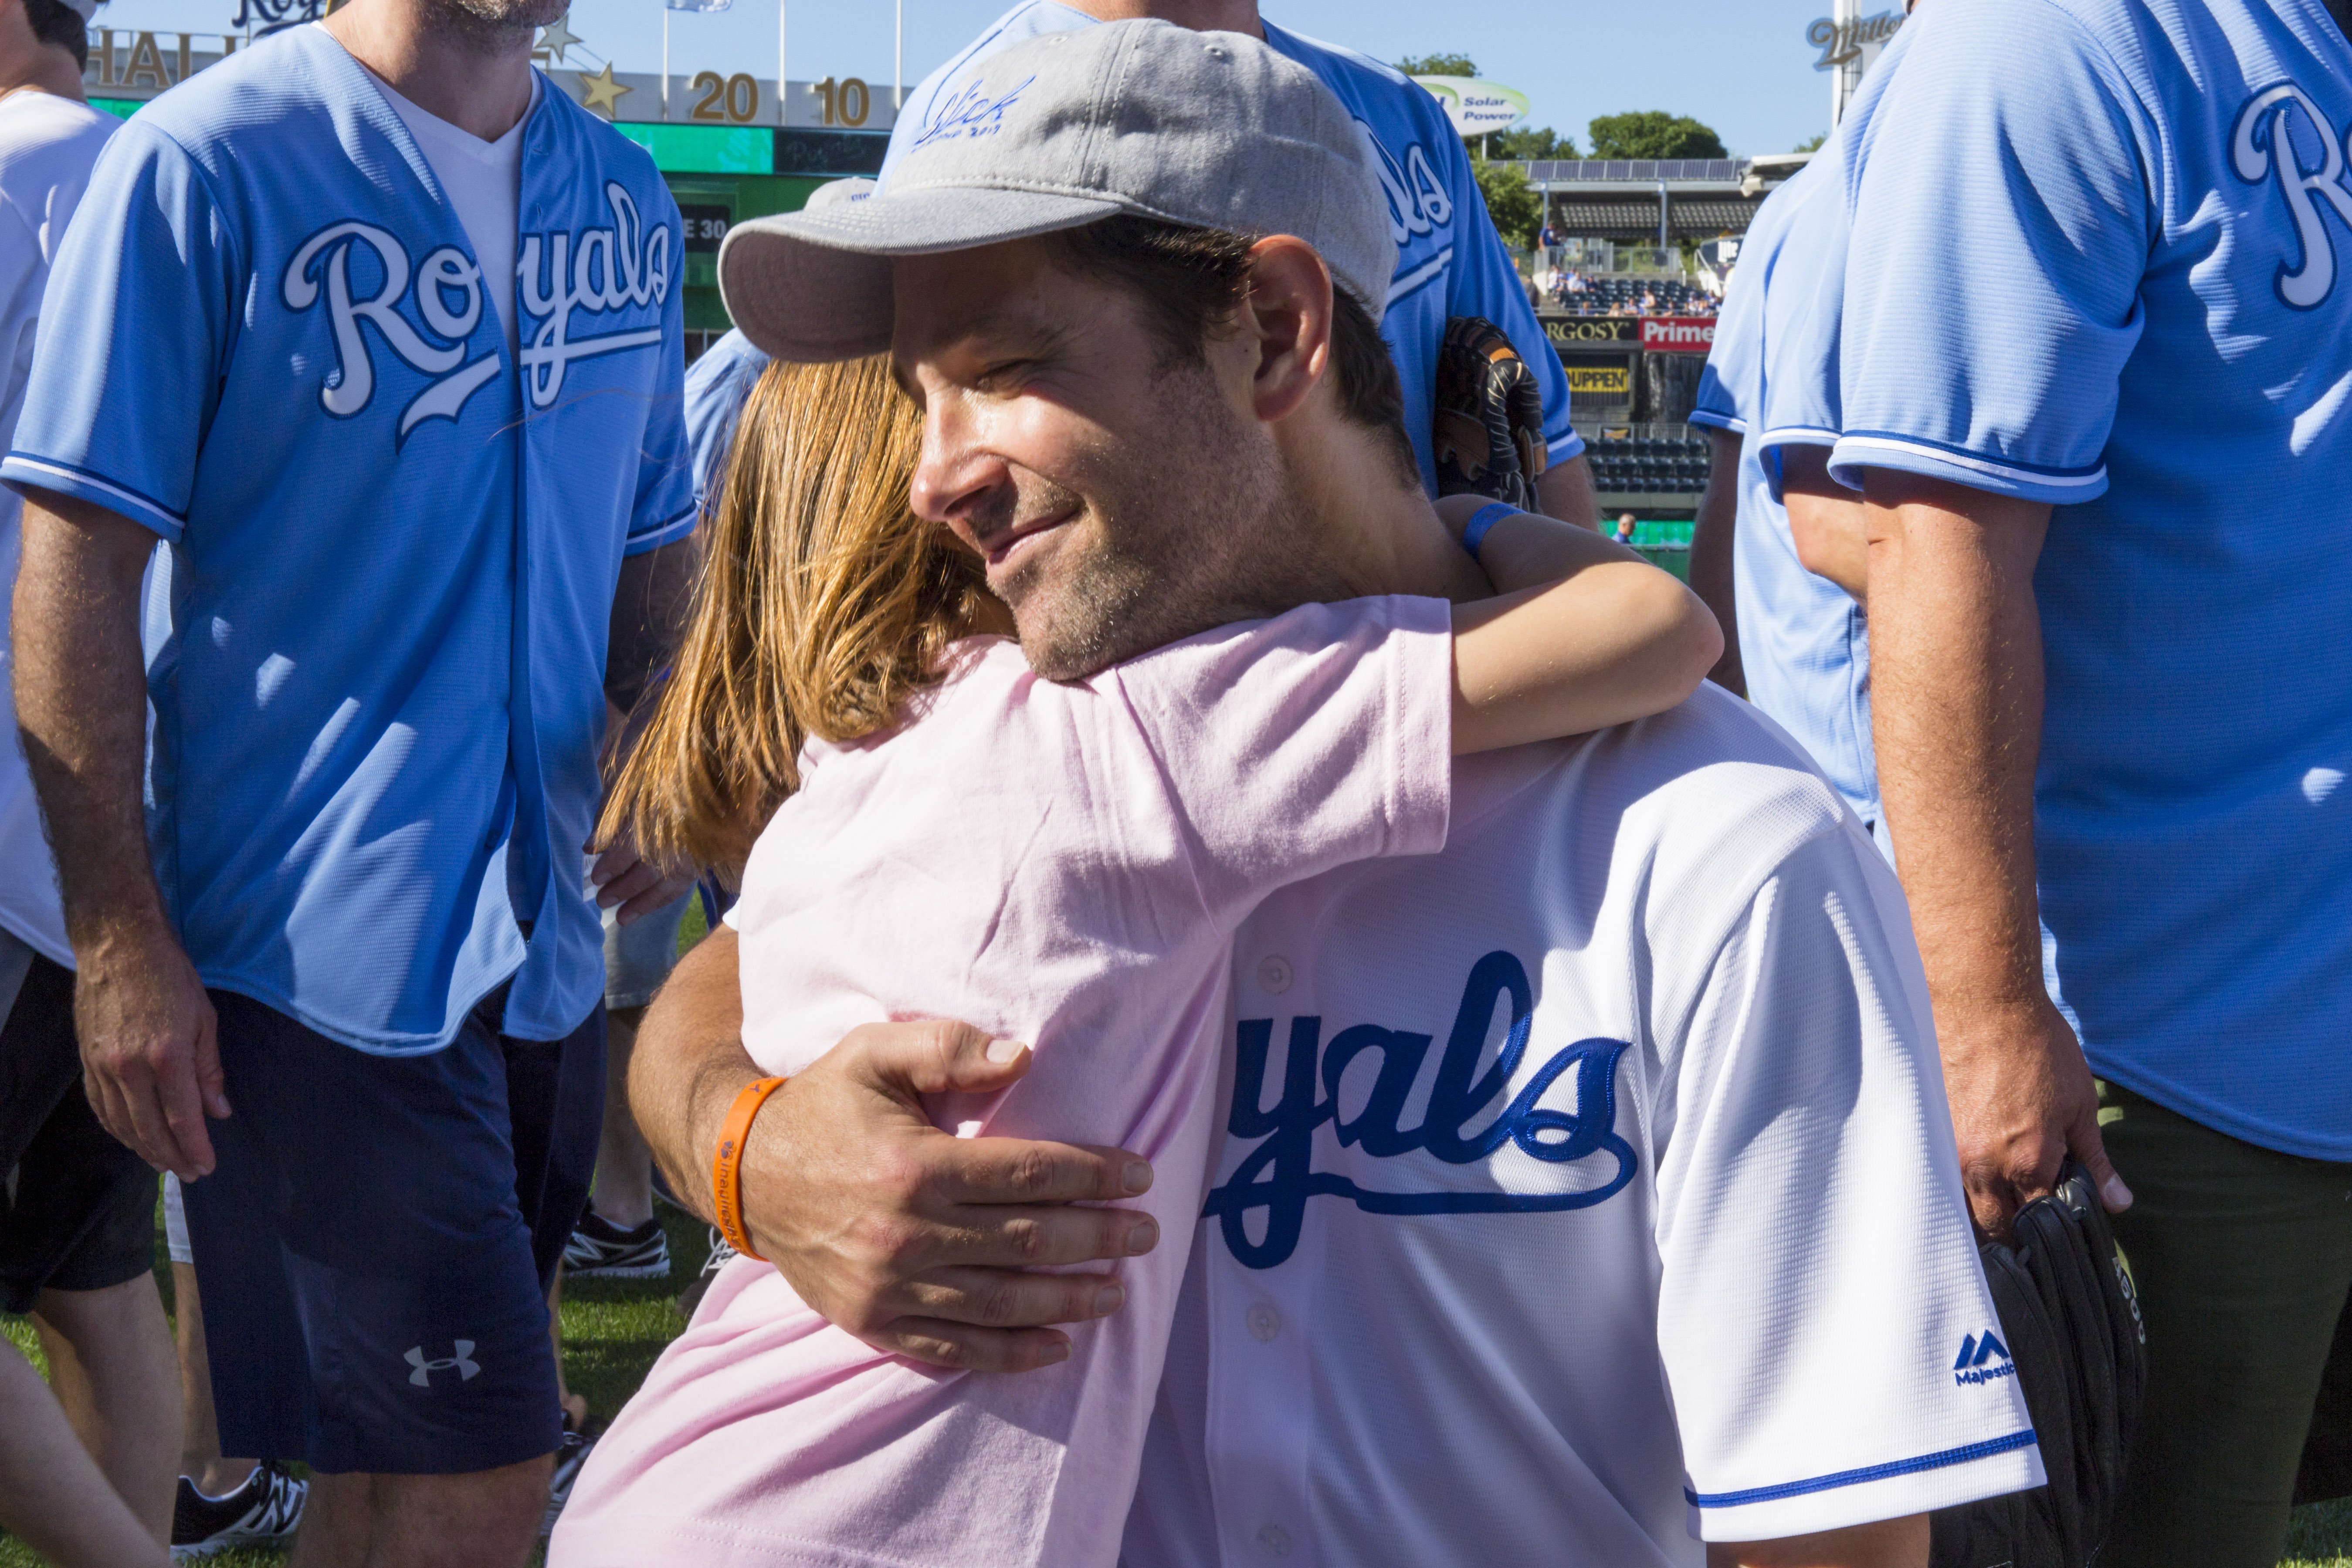 Paul Rudd hugs with his daughter Darby Rudd on June 23, 2017, in Kansas City, Missouri. | Source: Getty Images